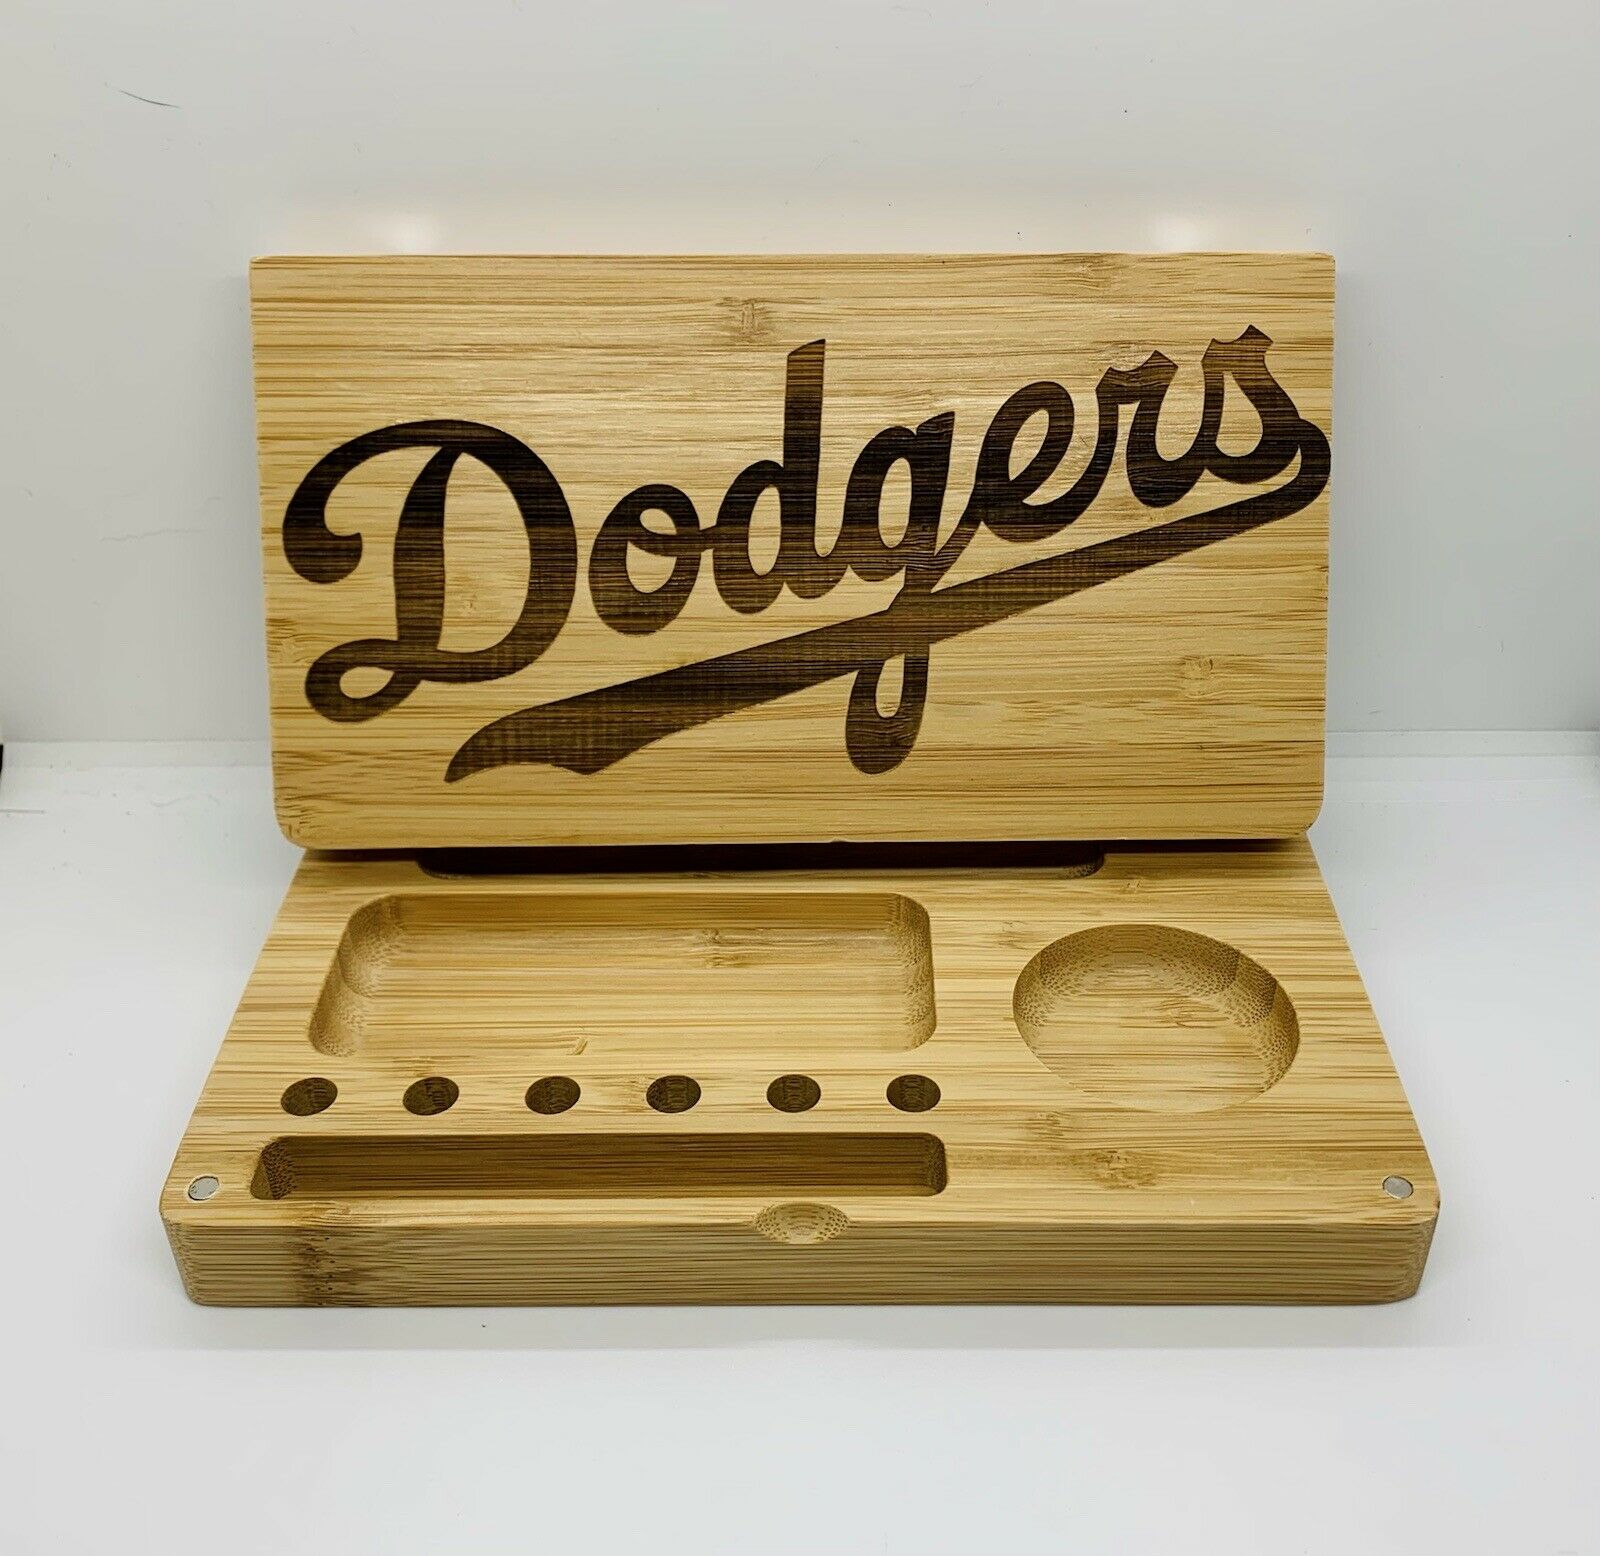 La Dodger Laser Engraved Bamboo High Quality Rolling Tray Pop Gift